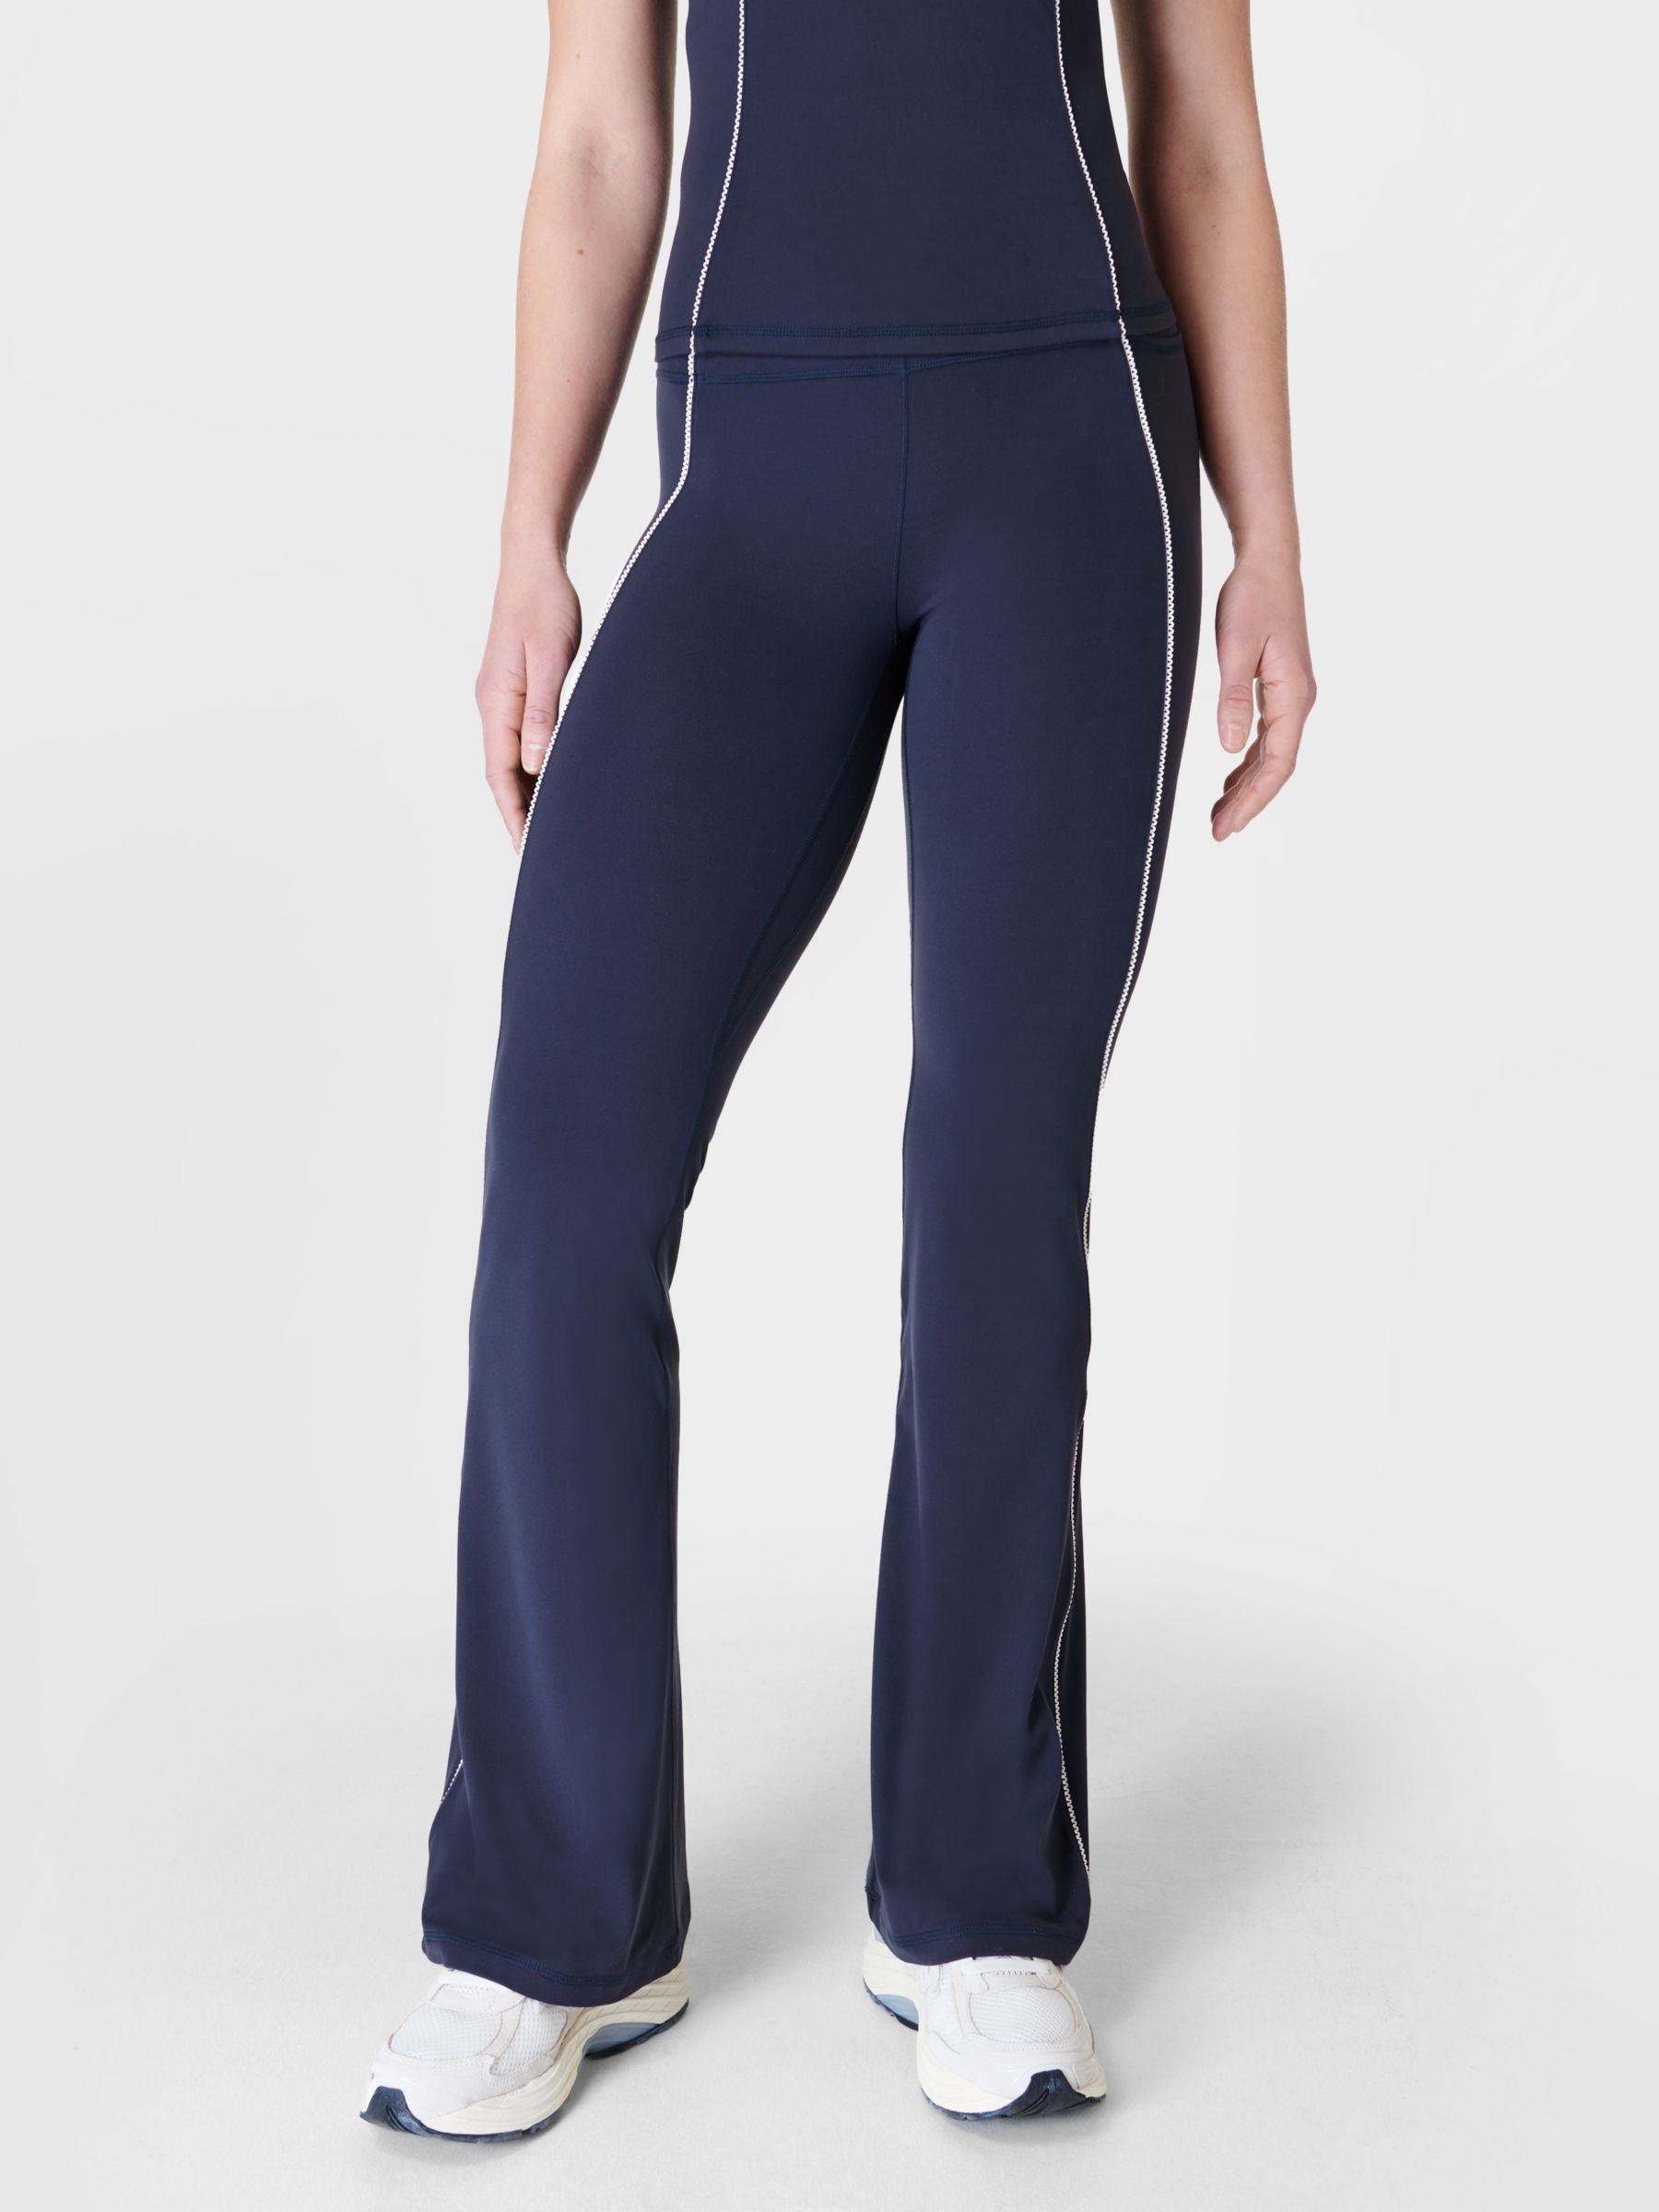 Buy Sweaty Betty Picot Lace Flared Trousers, Navy Blue Online at johnlewis.com